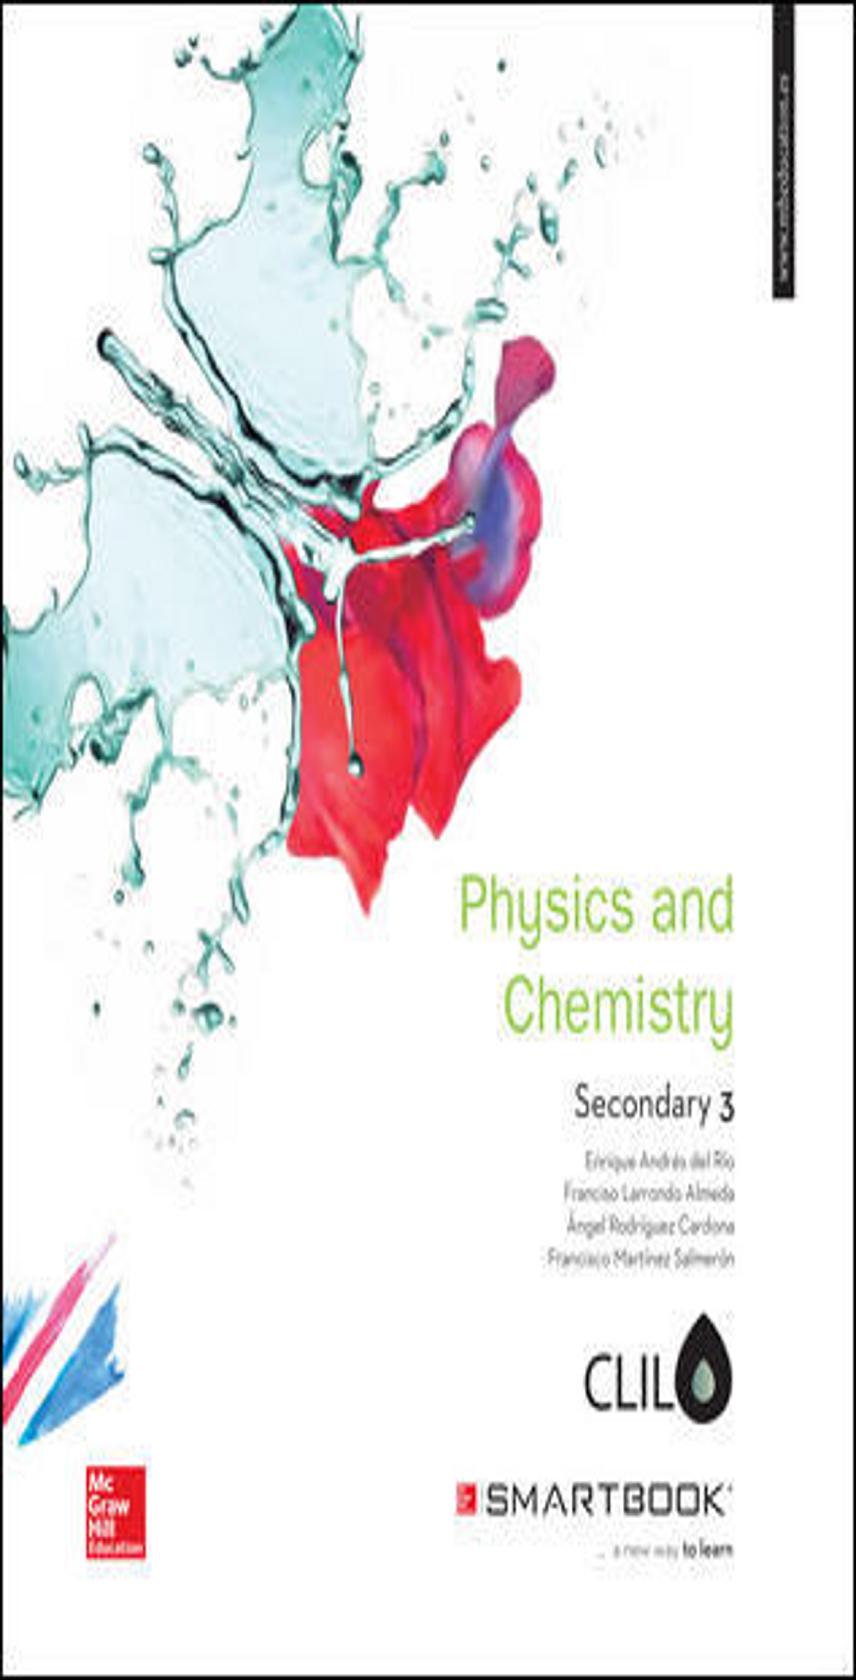 PHYSICS AND CHEMISTRY SECONDARY 3 ESO CLIL Smartbook